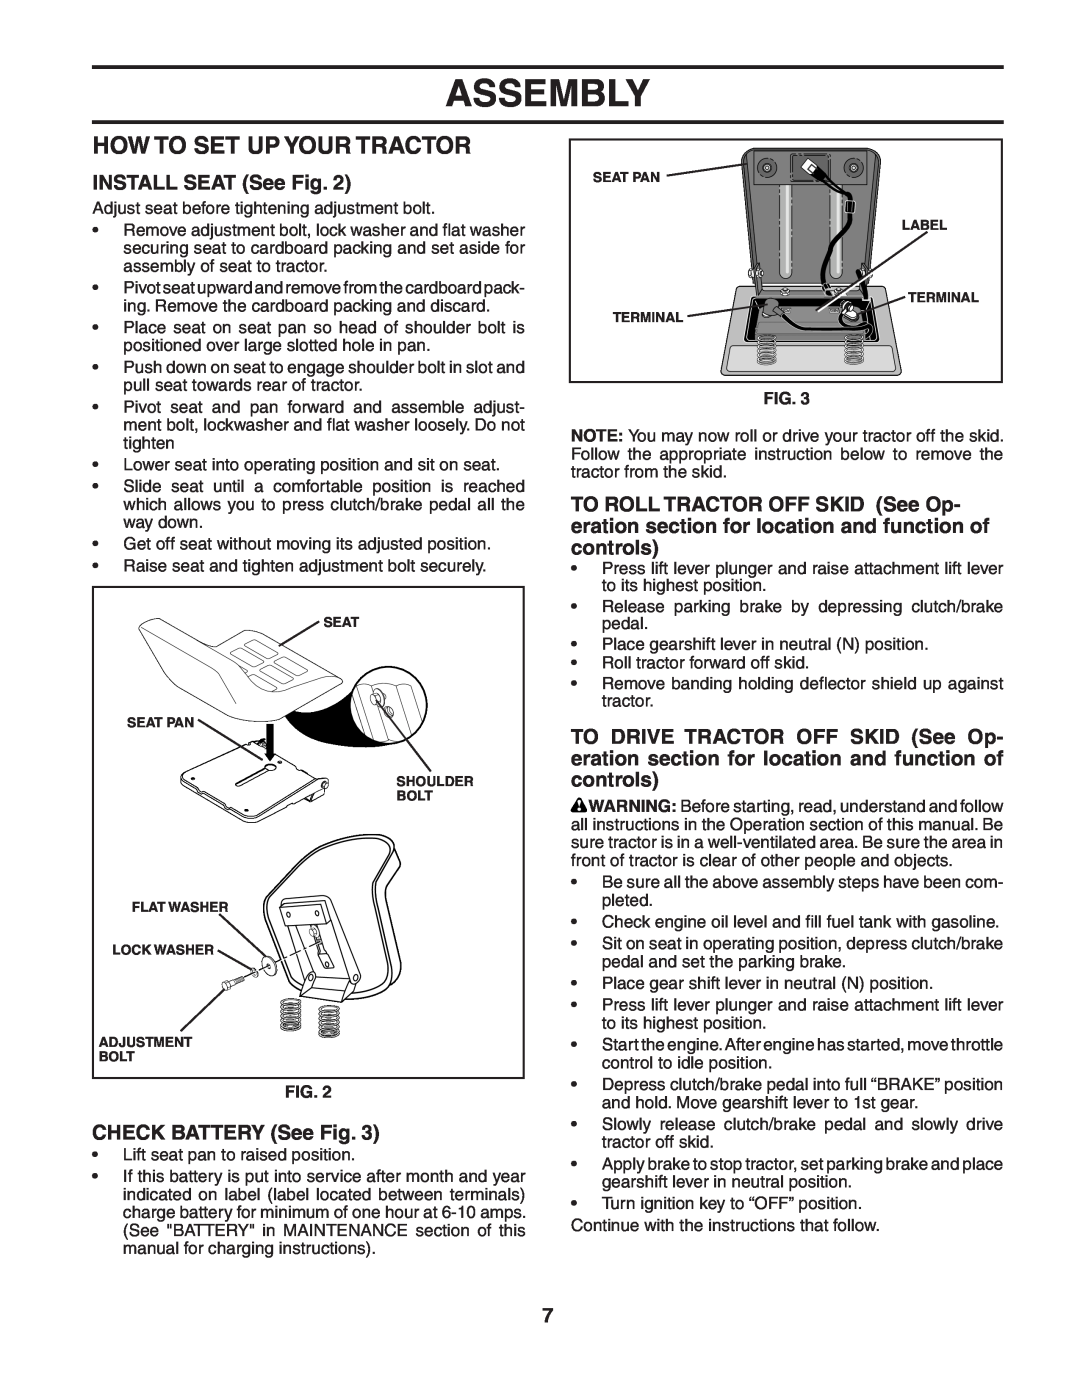 Poulan PO1742STC manual How To Set Up Your Tractor, INSTALL SEAT See Fig, CHECK BATTERY See Fig, Assembly 